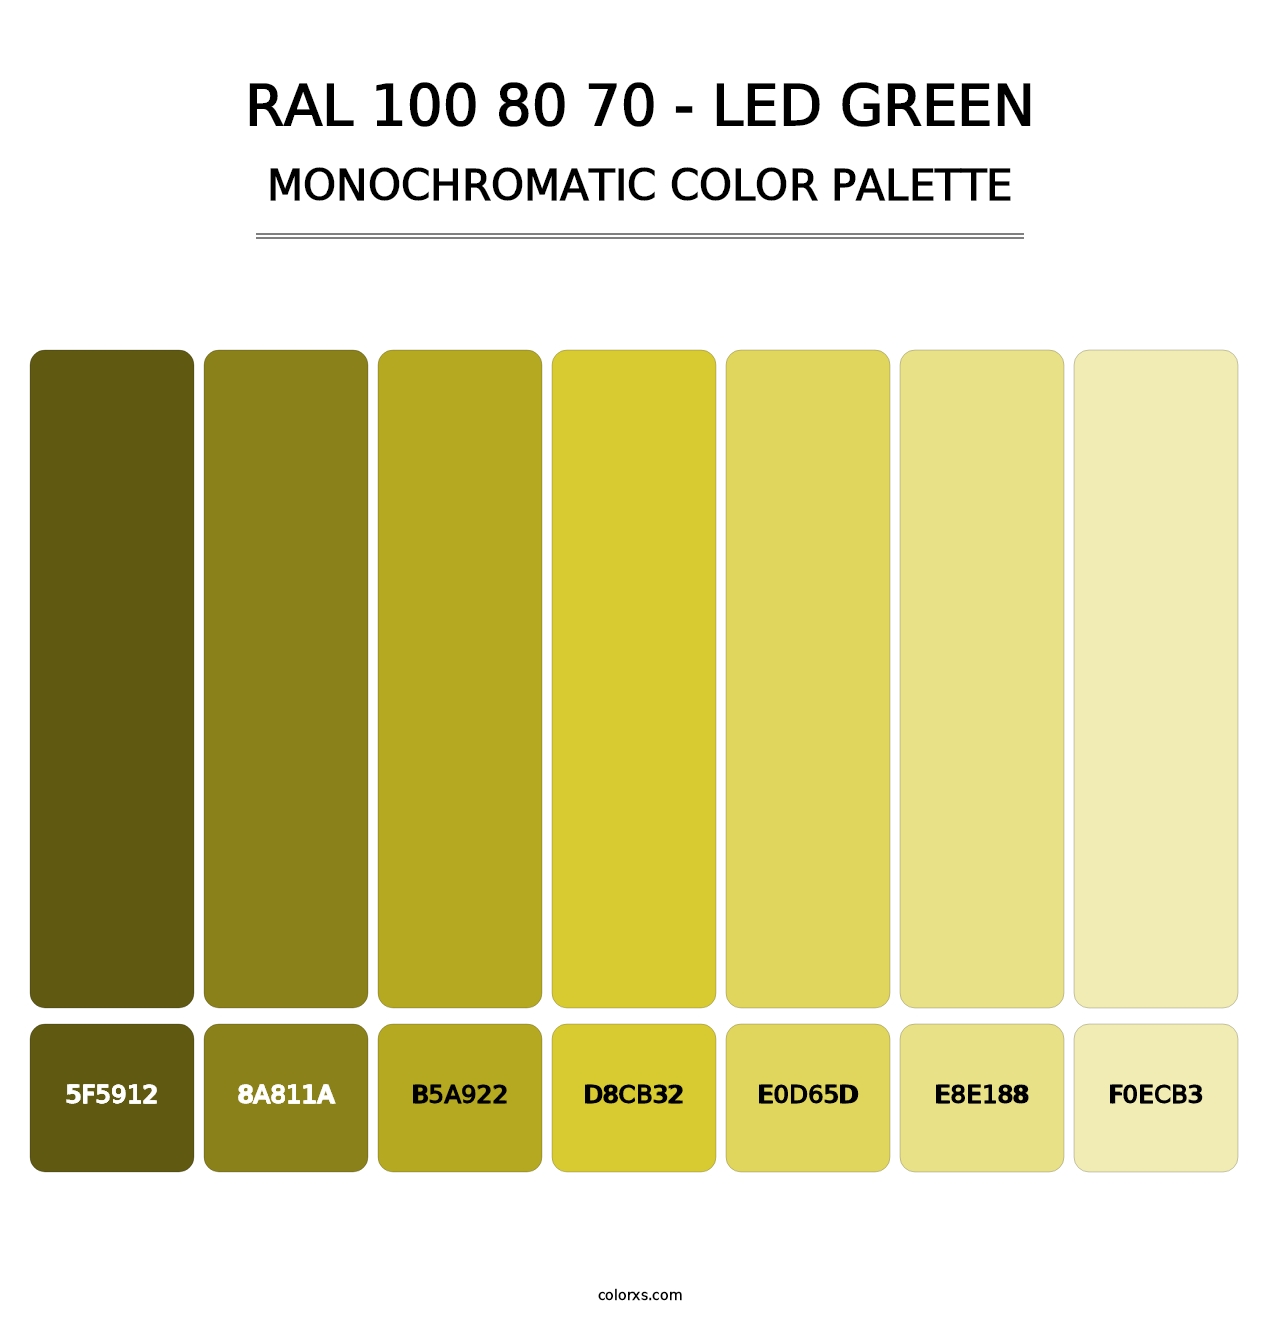 RAL 100 80 70 - LED Green - Monochromatic Color Palette